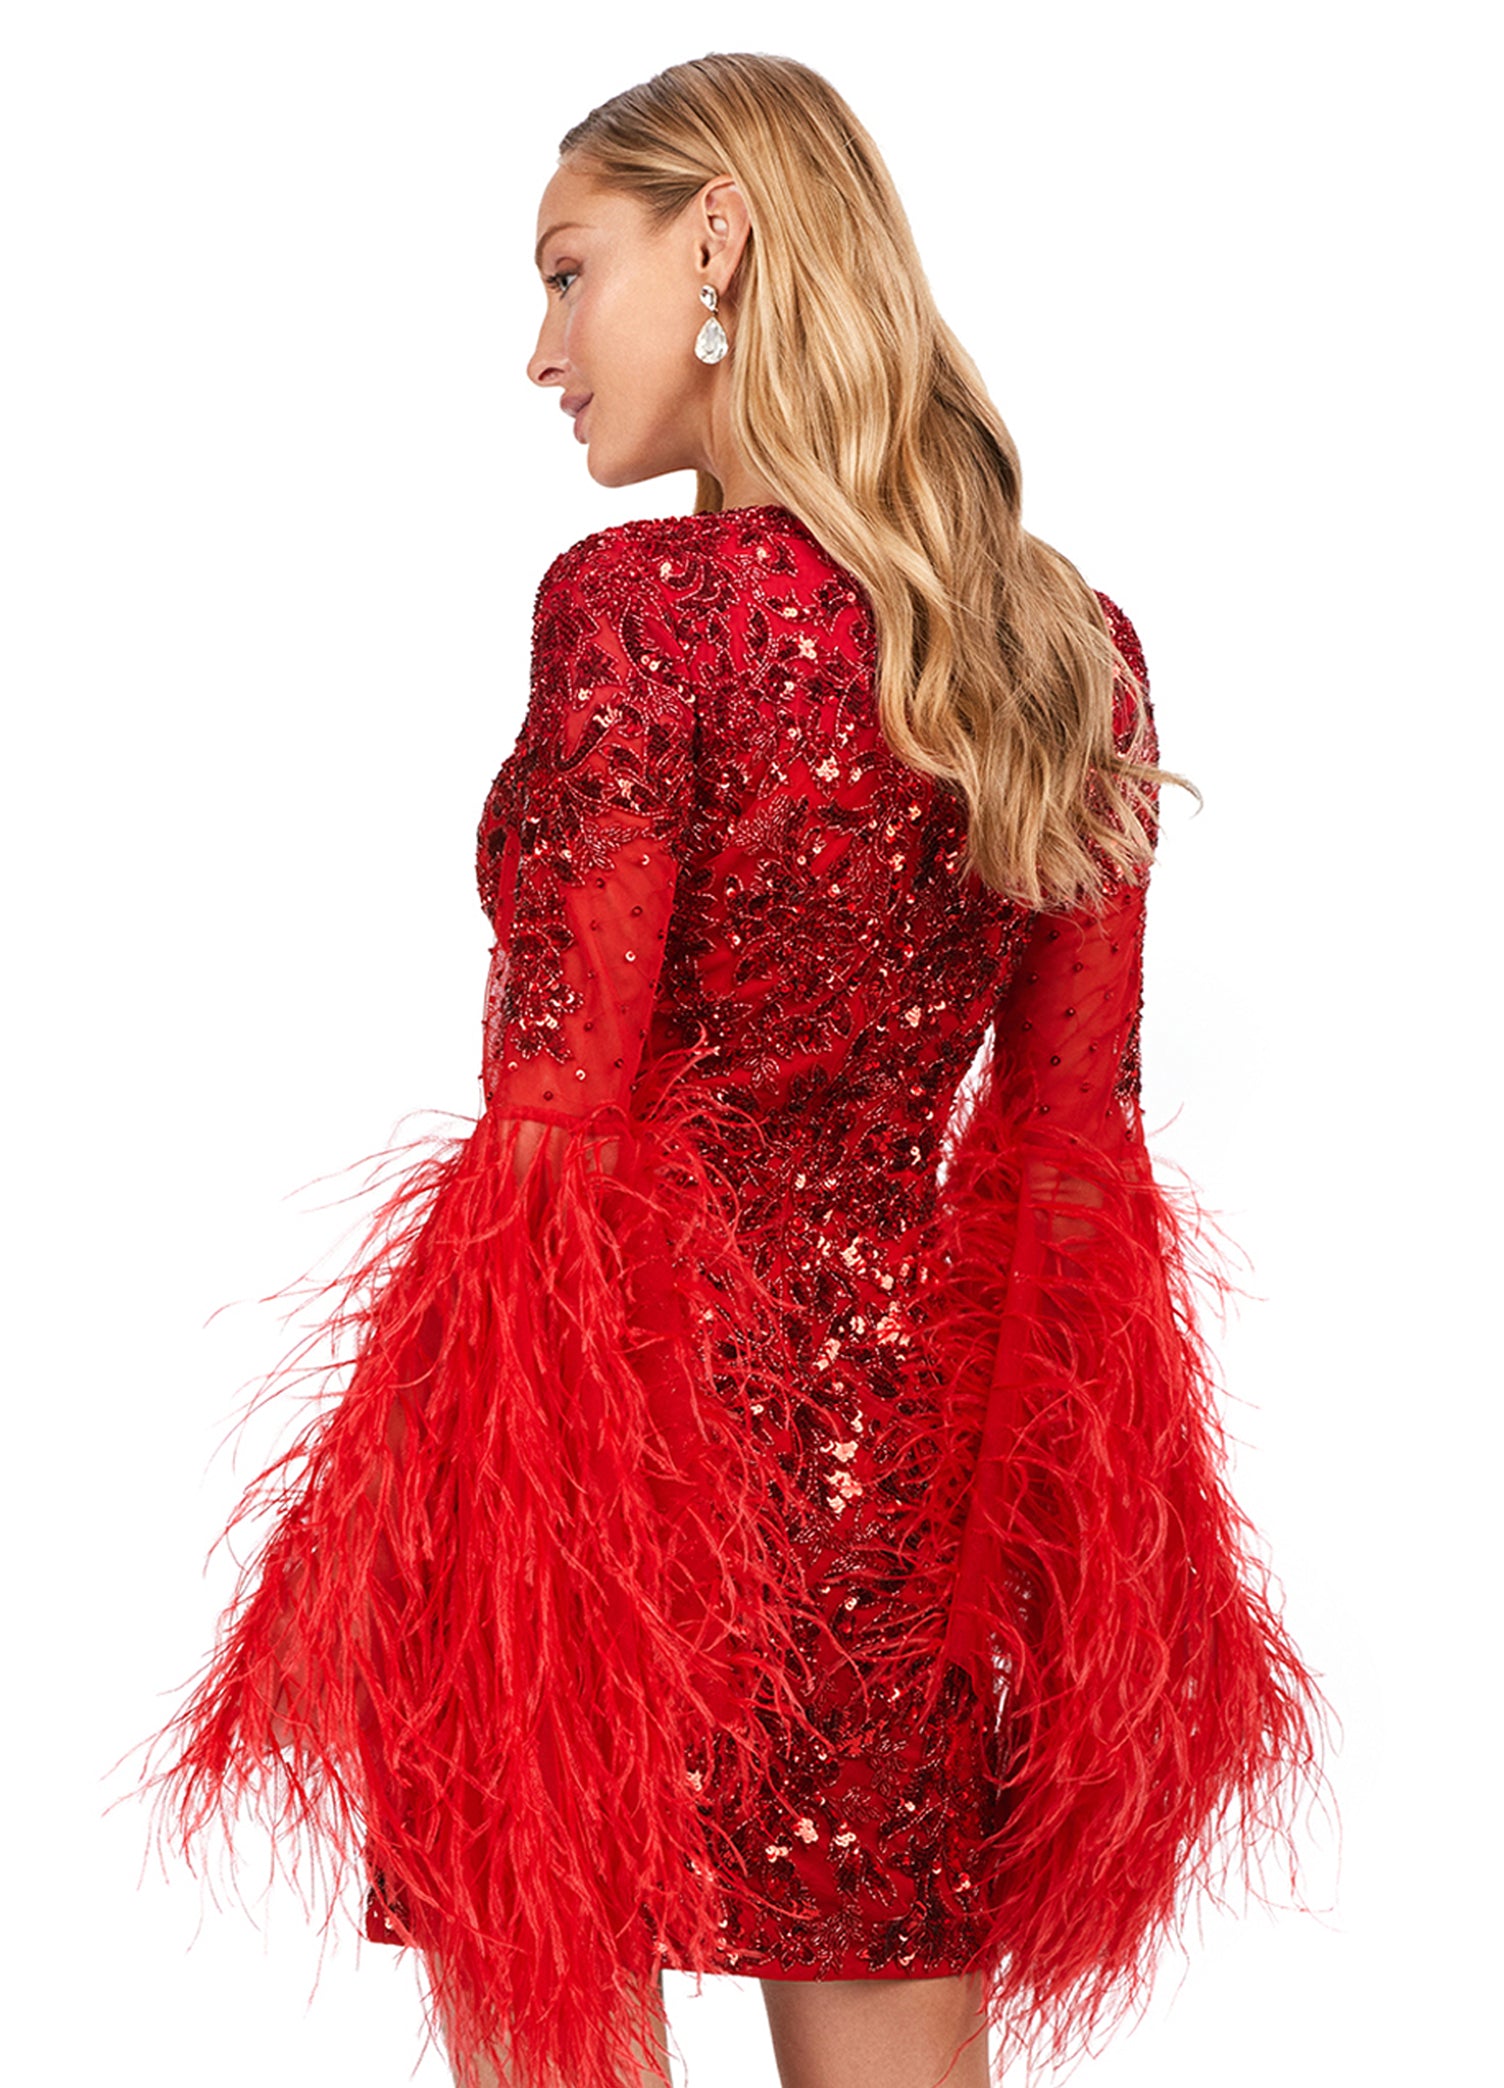 Ashley Lauren 4603 Fully Beaded Bell Sleeve With Feathers V-Neck Cocktail Homecoming Dress. Make a statement in this fully beaded cocktail dress with feather adorned flare sleeves! The look is complete with a V-neckline, full back and fitted skirt.